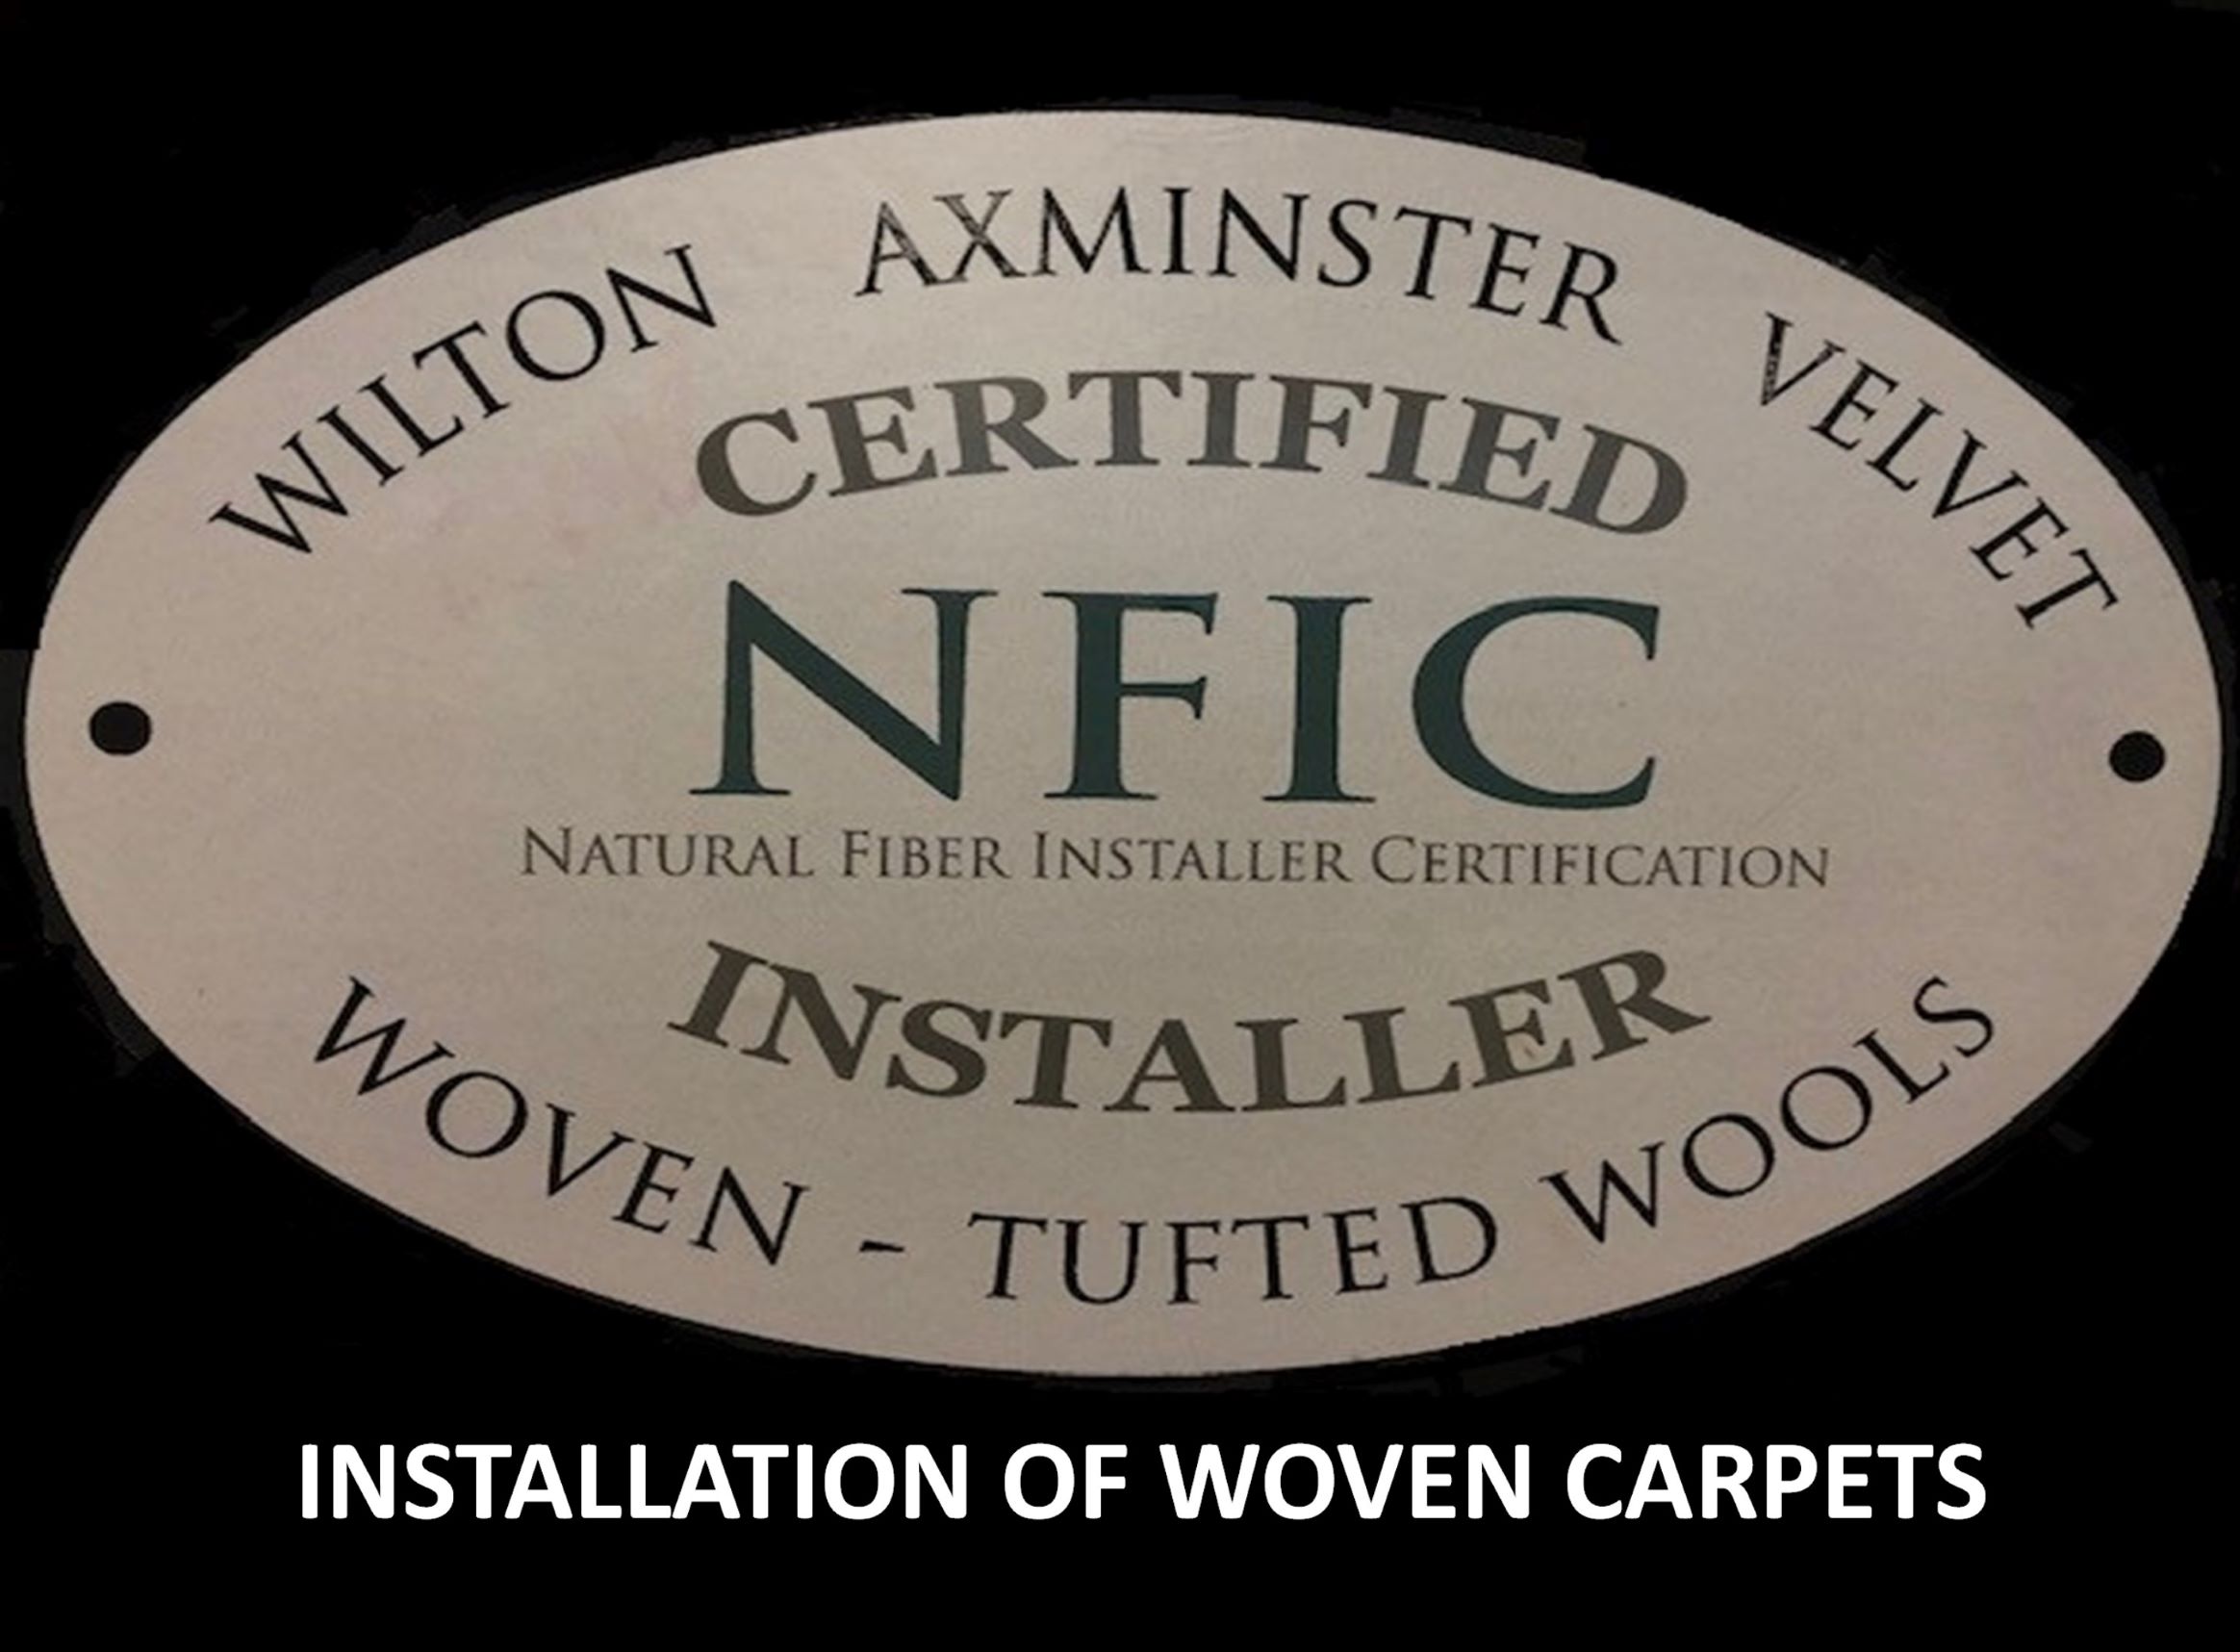 Installation of Woven Carpets NFIC